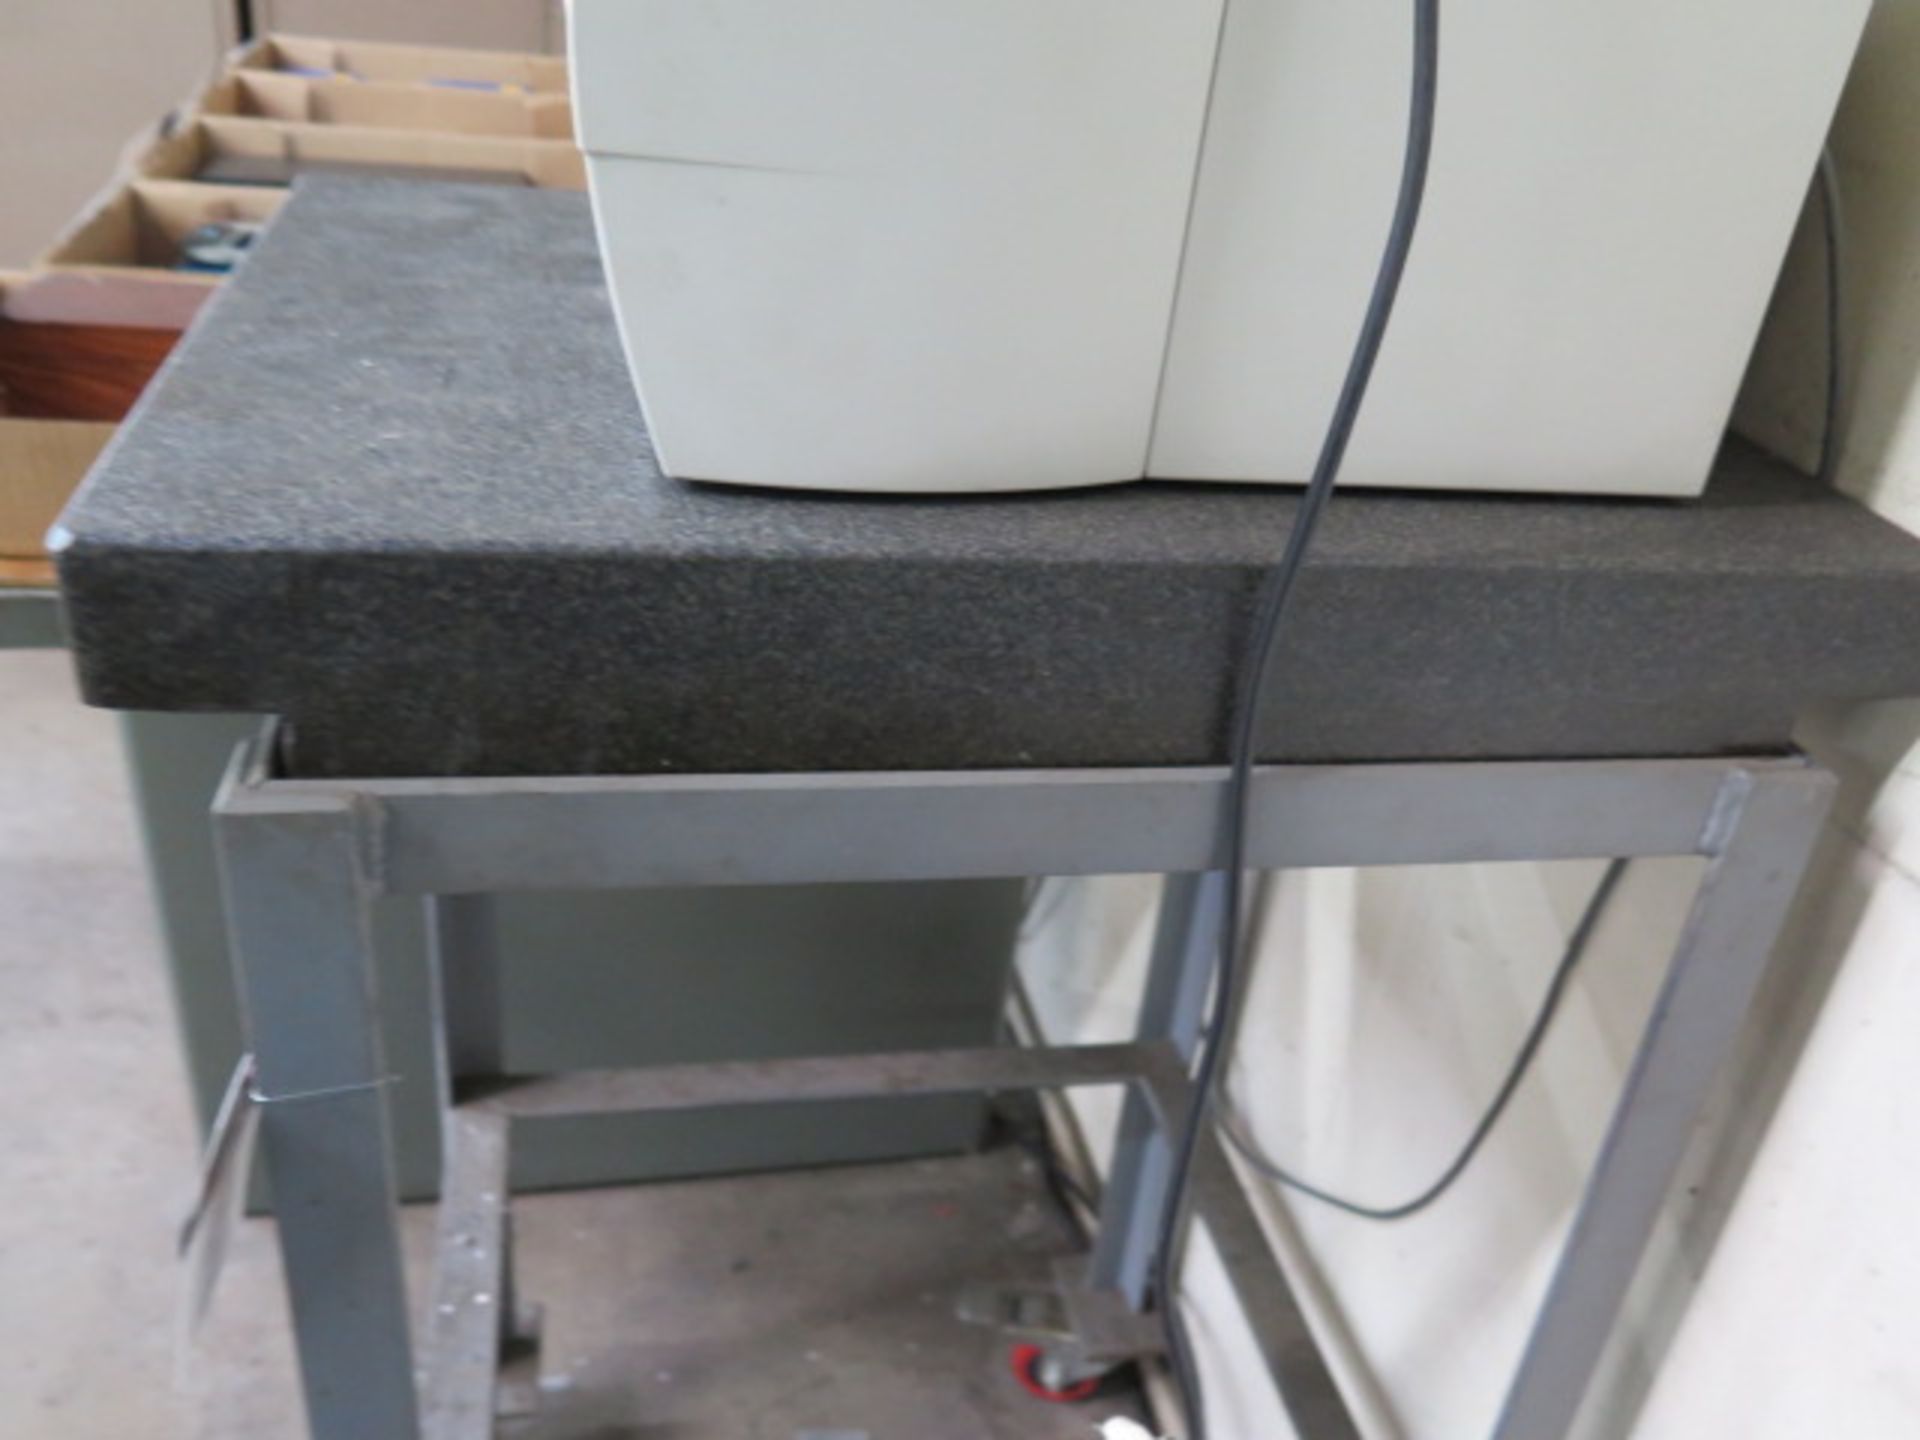 18" x 24" x 4" 2-Ledge Granite Surface Plate w/ Roll Stand (SOLD AS-IS - NO WARRANTY) - Bild 4 aus 5